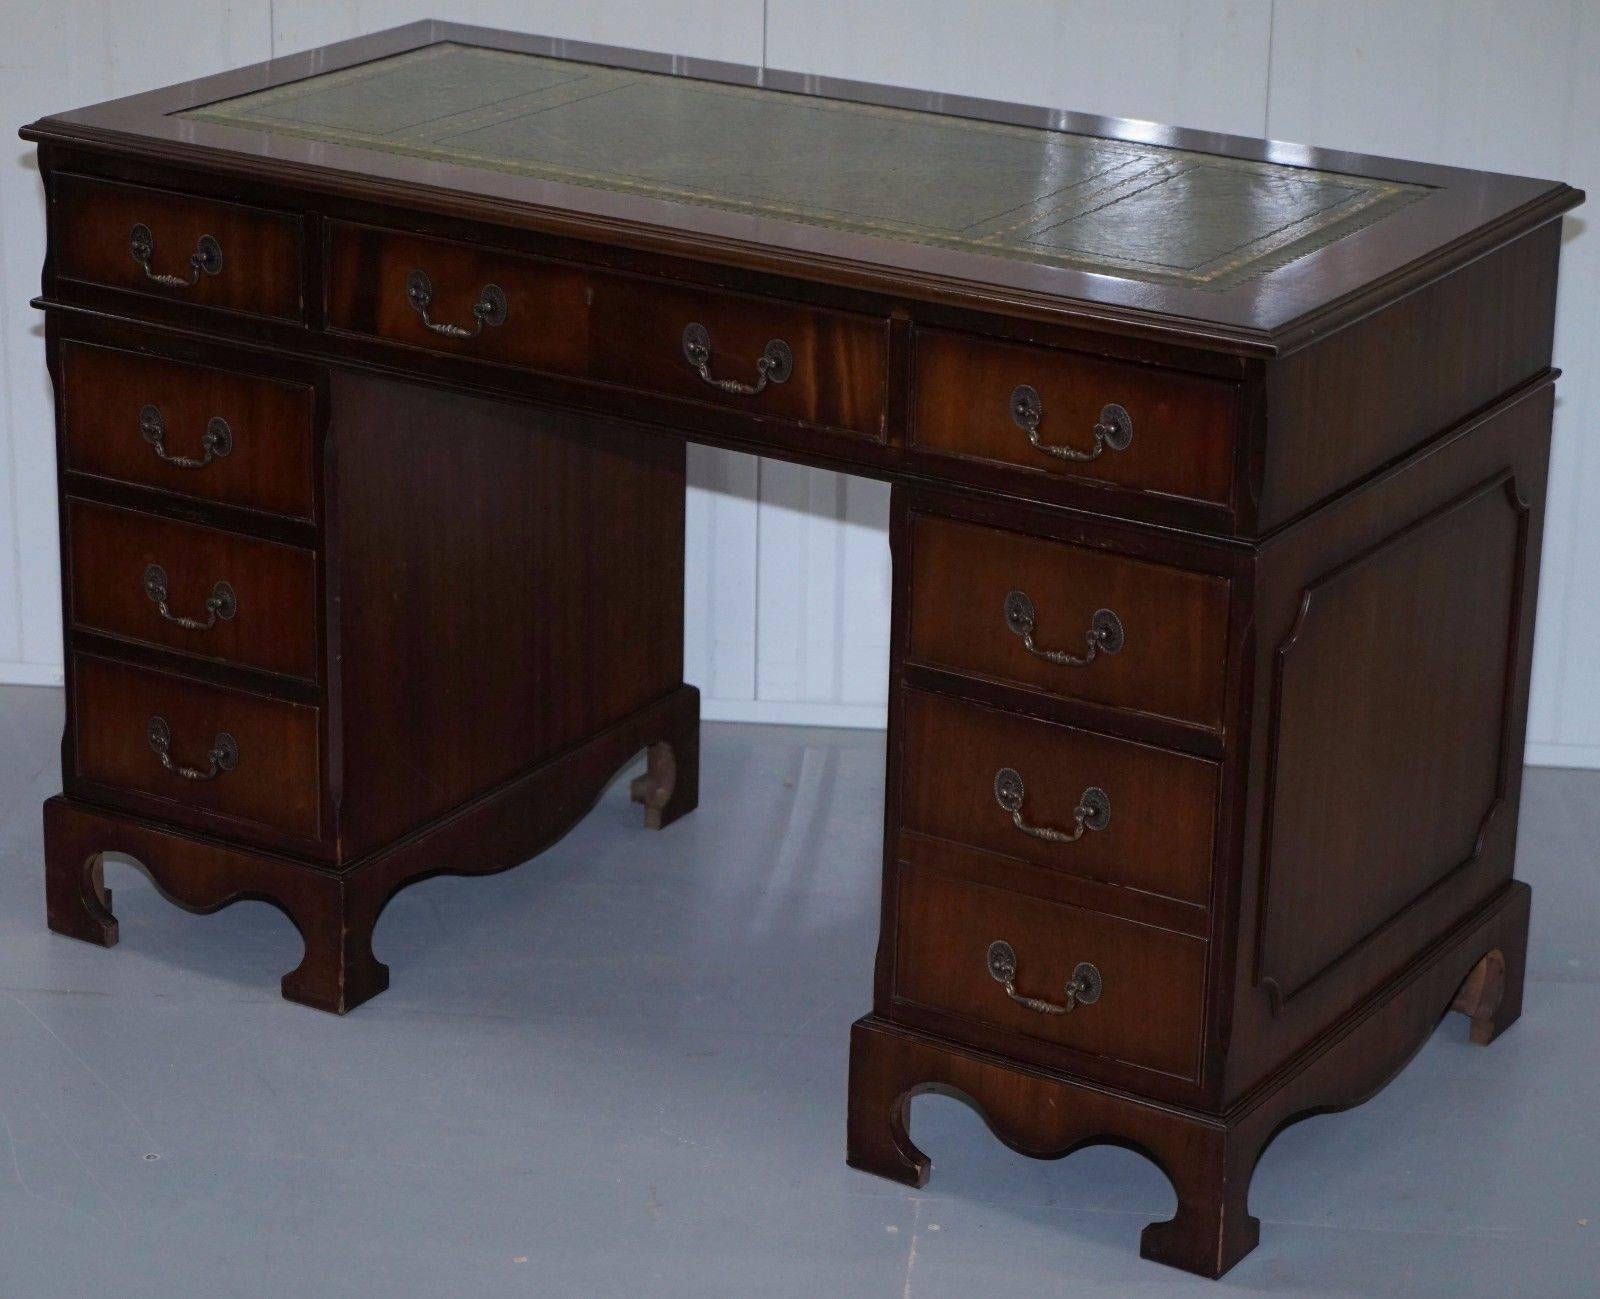 Victorian 35 Year Old Premium Twin Pedestal Mahogany Partner Desk Leather Writing Surface